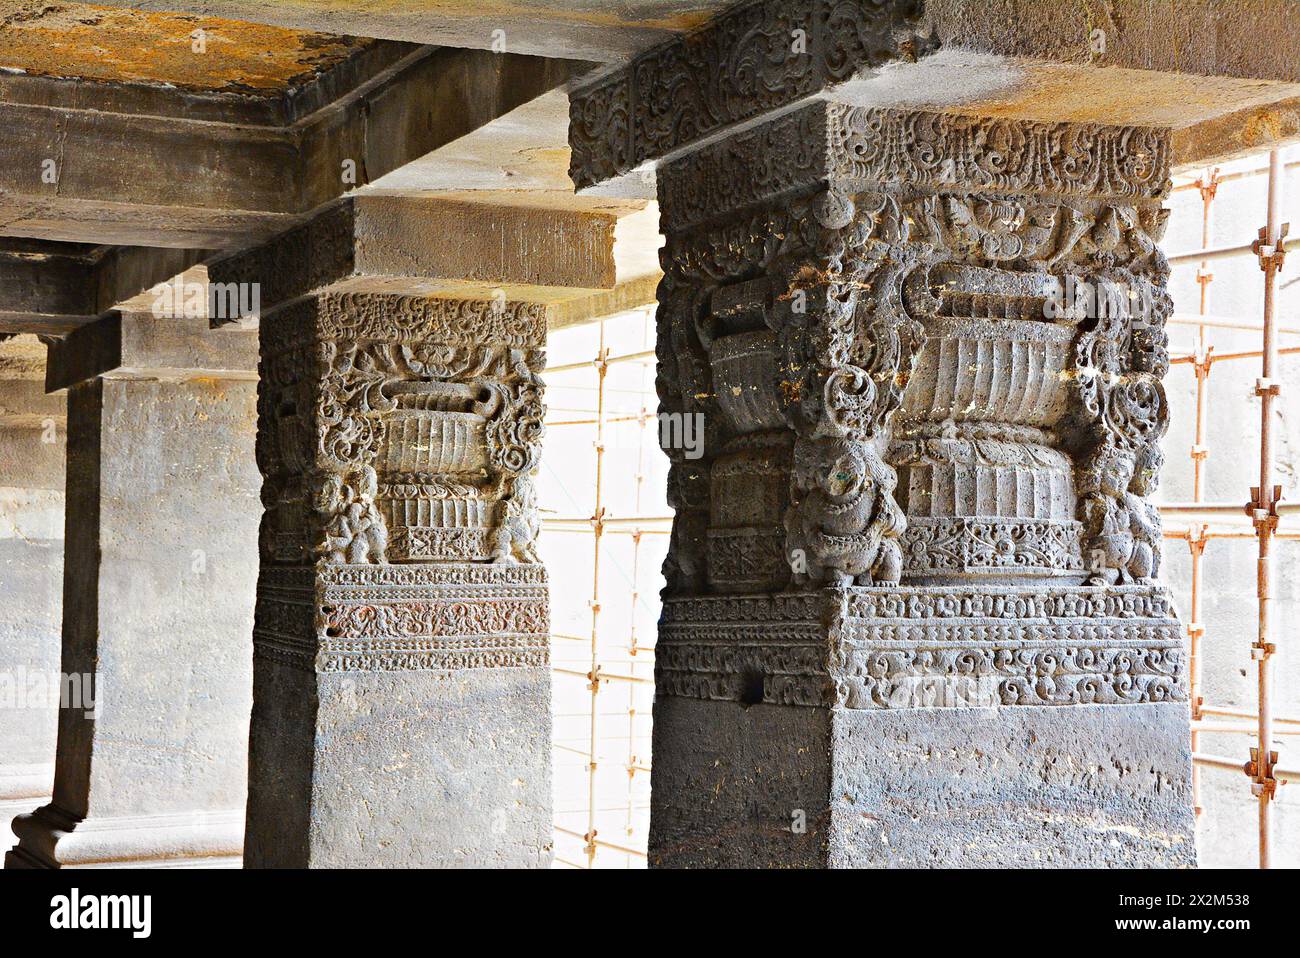 Ellora Buddhist Caves: Cave No 12 Upper wing, second storey showing Ghata pallava (leaf and foliage) motive with Gana (dwarf) figures on the pillars. Stock Photo